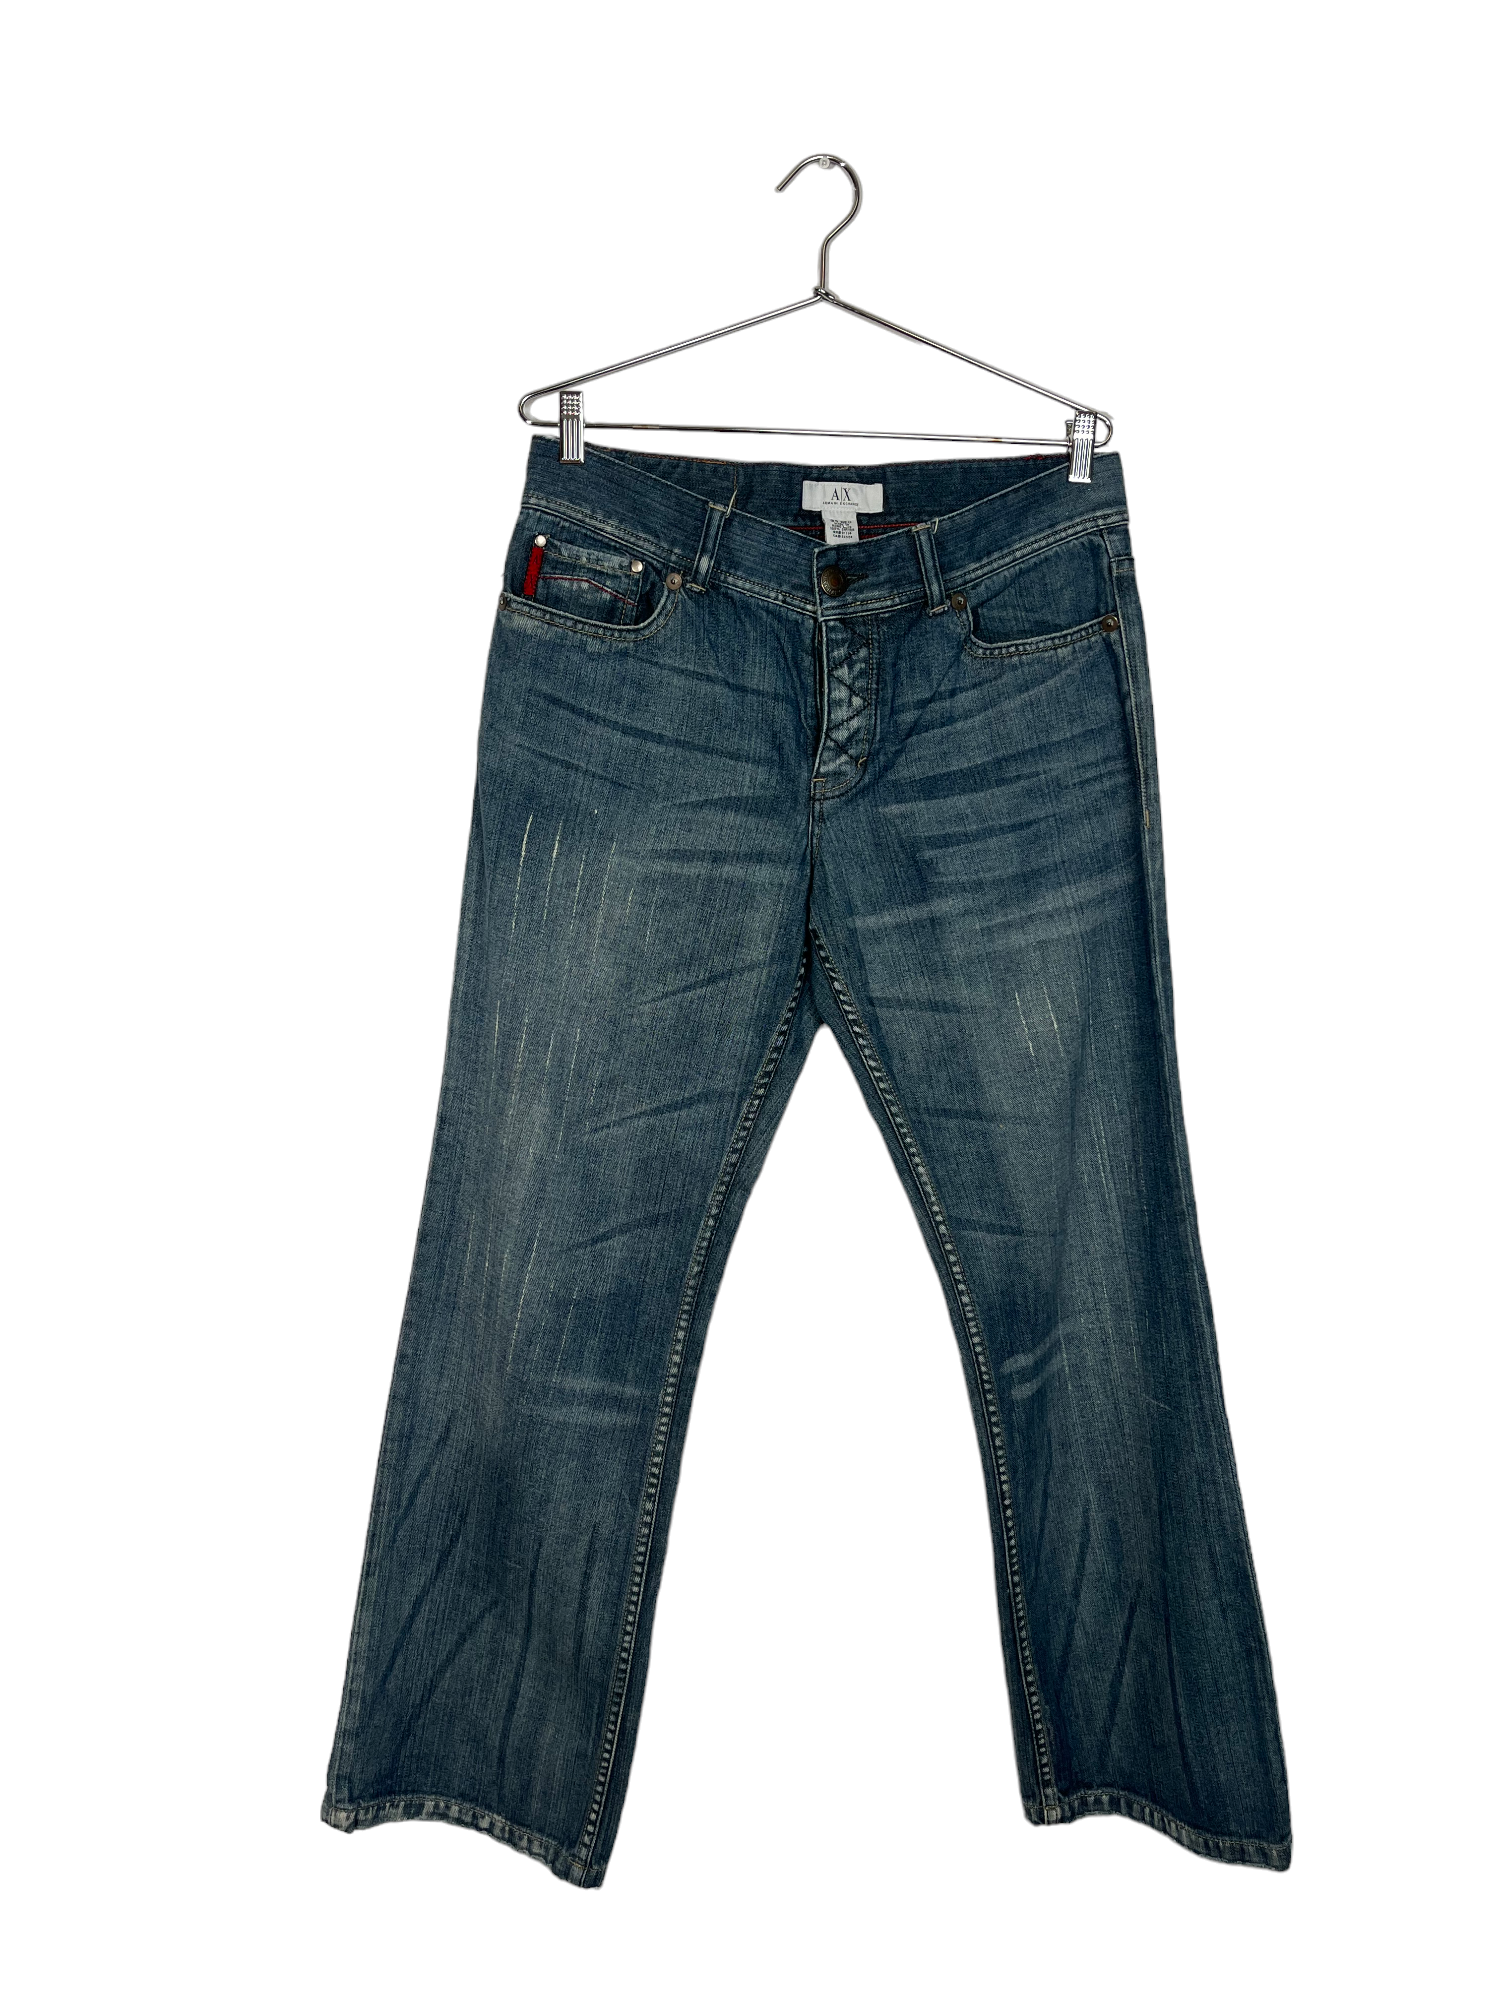 Armani Exchange Jeans with Red Stick